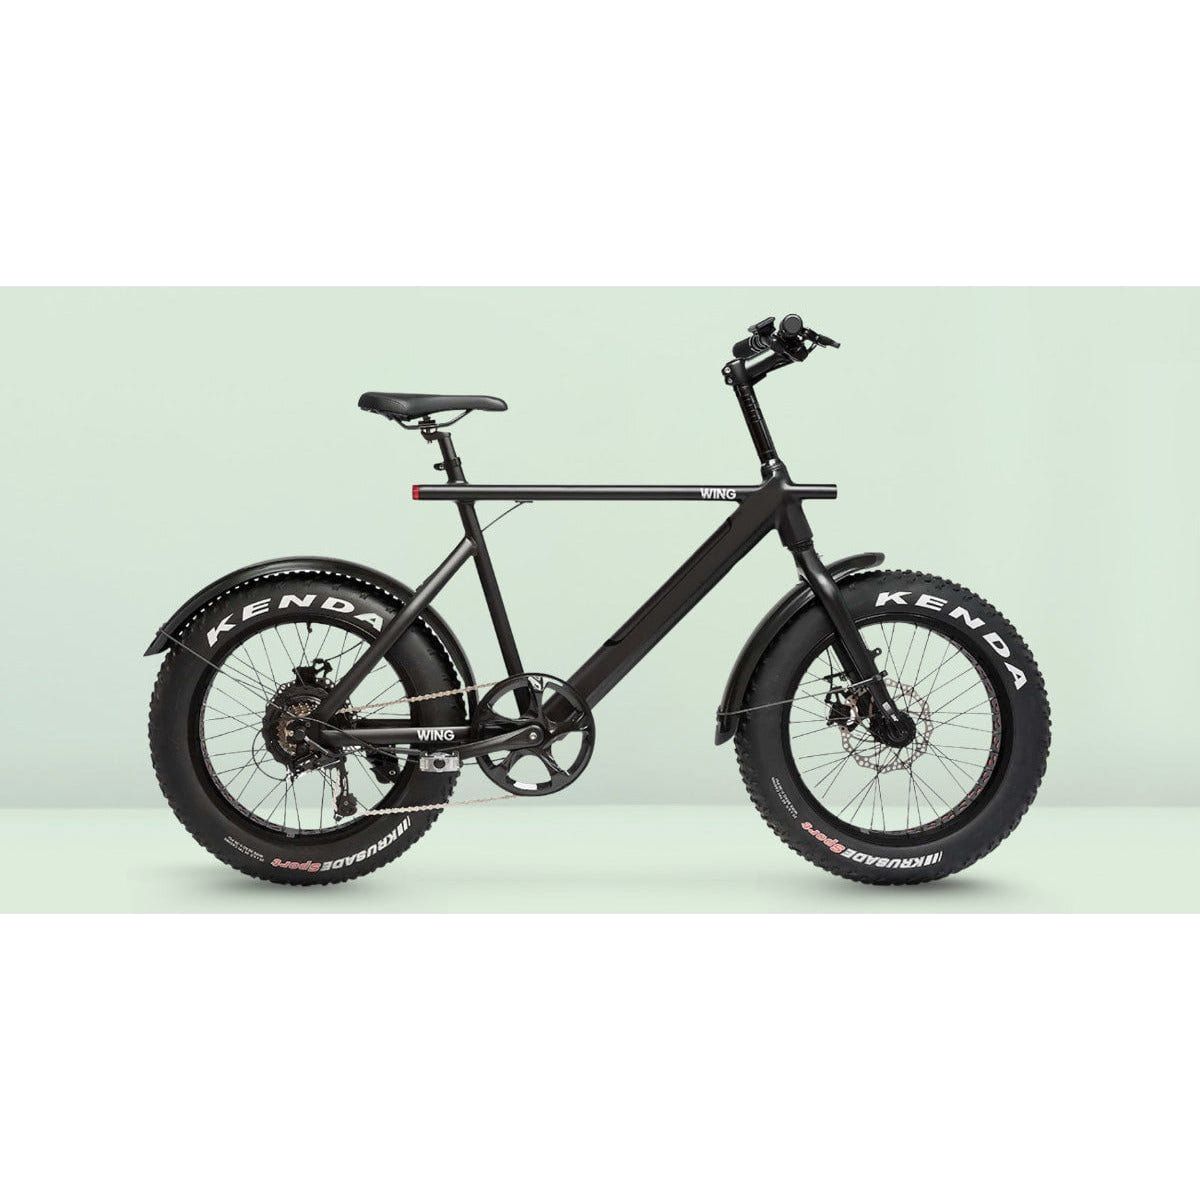 Wing Bikes Bicycles Freedom Fatty 2